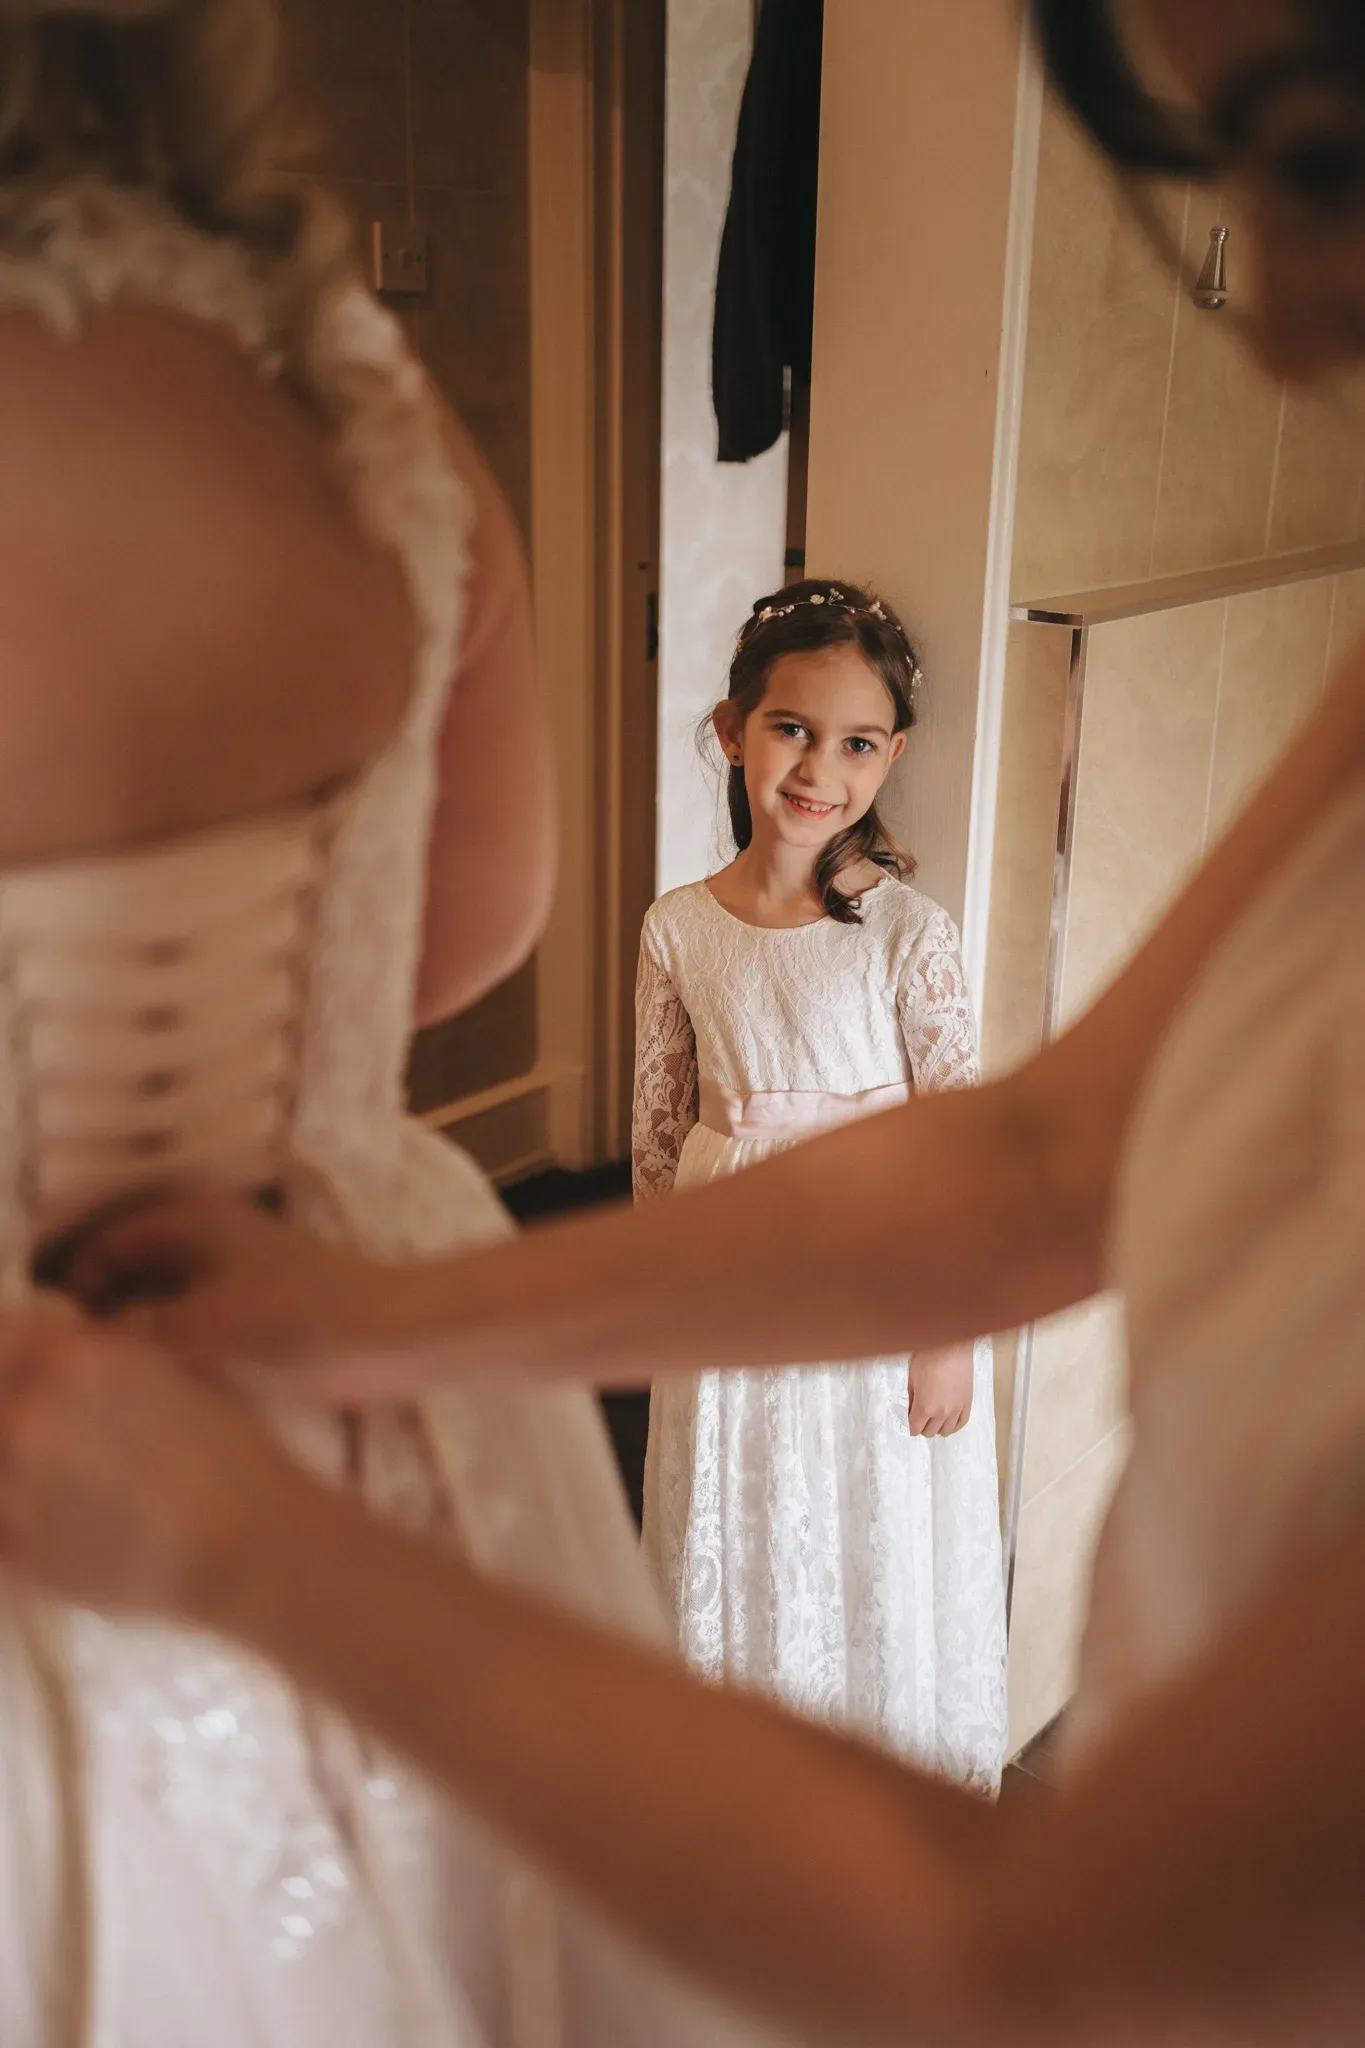 A young girl in a white lace dress smiles as she looks at a bride being helped into her gown, visible in a mirror's reflection. the setting suggests a room prepared for a wedding.